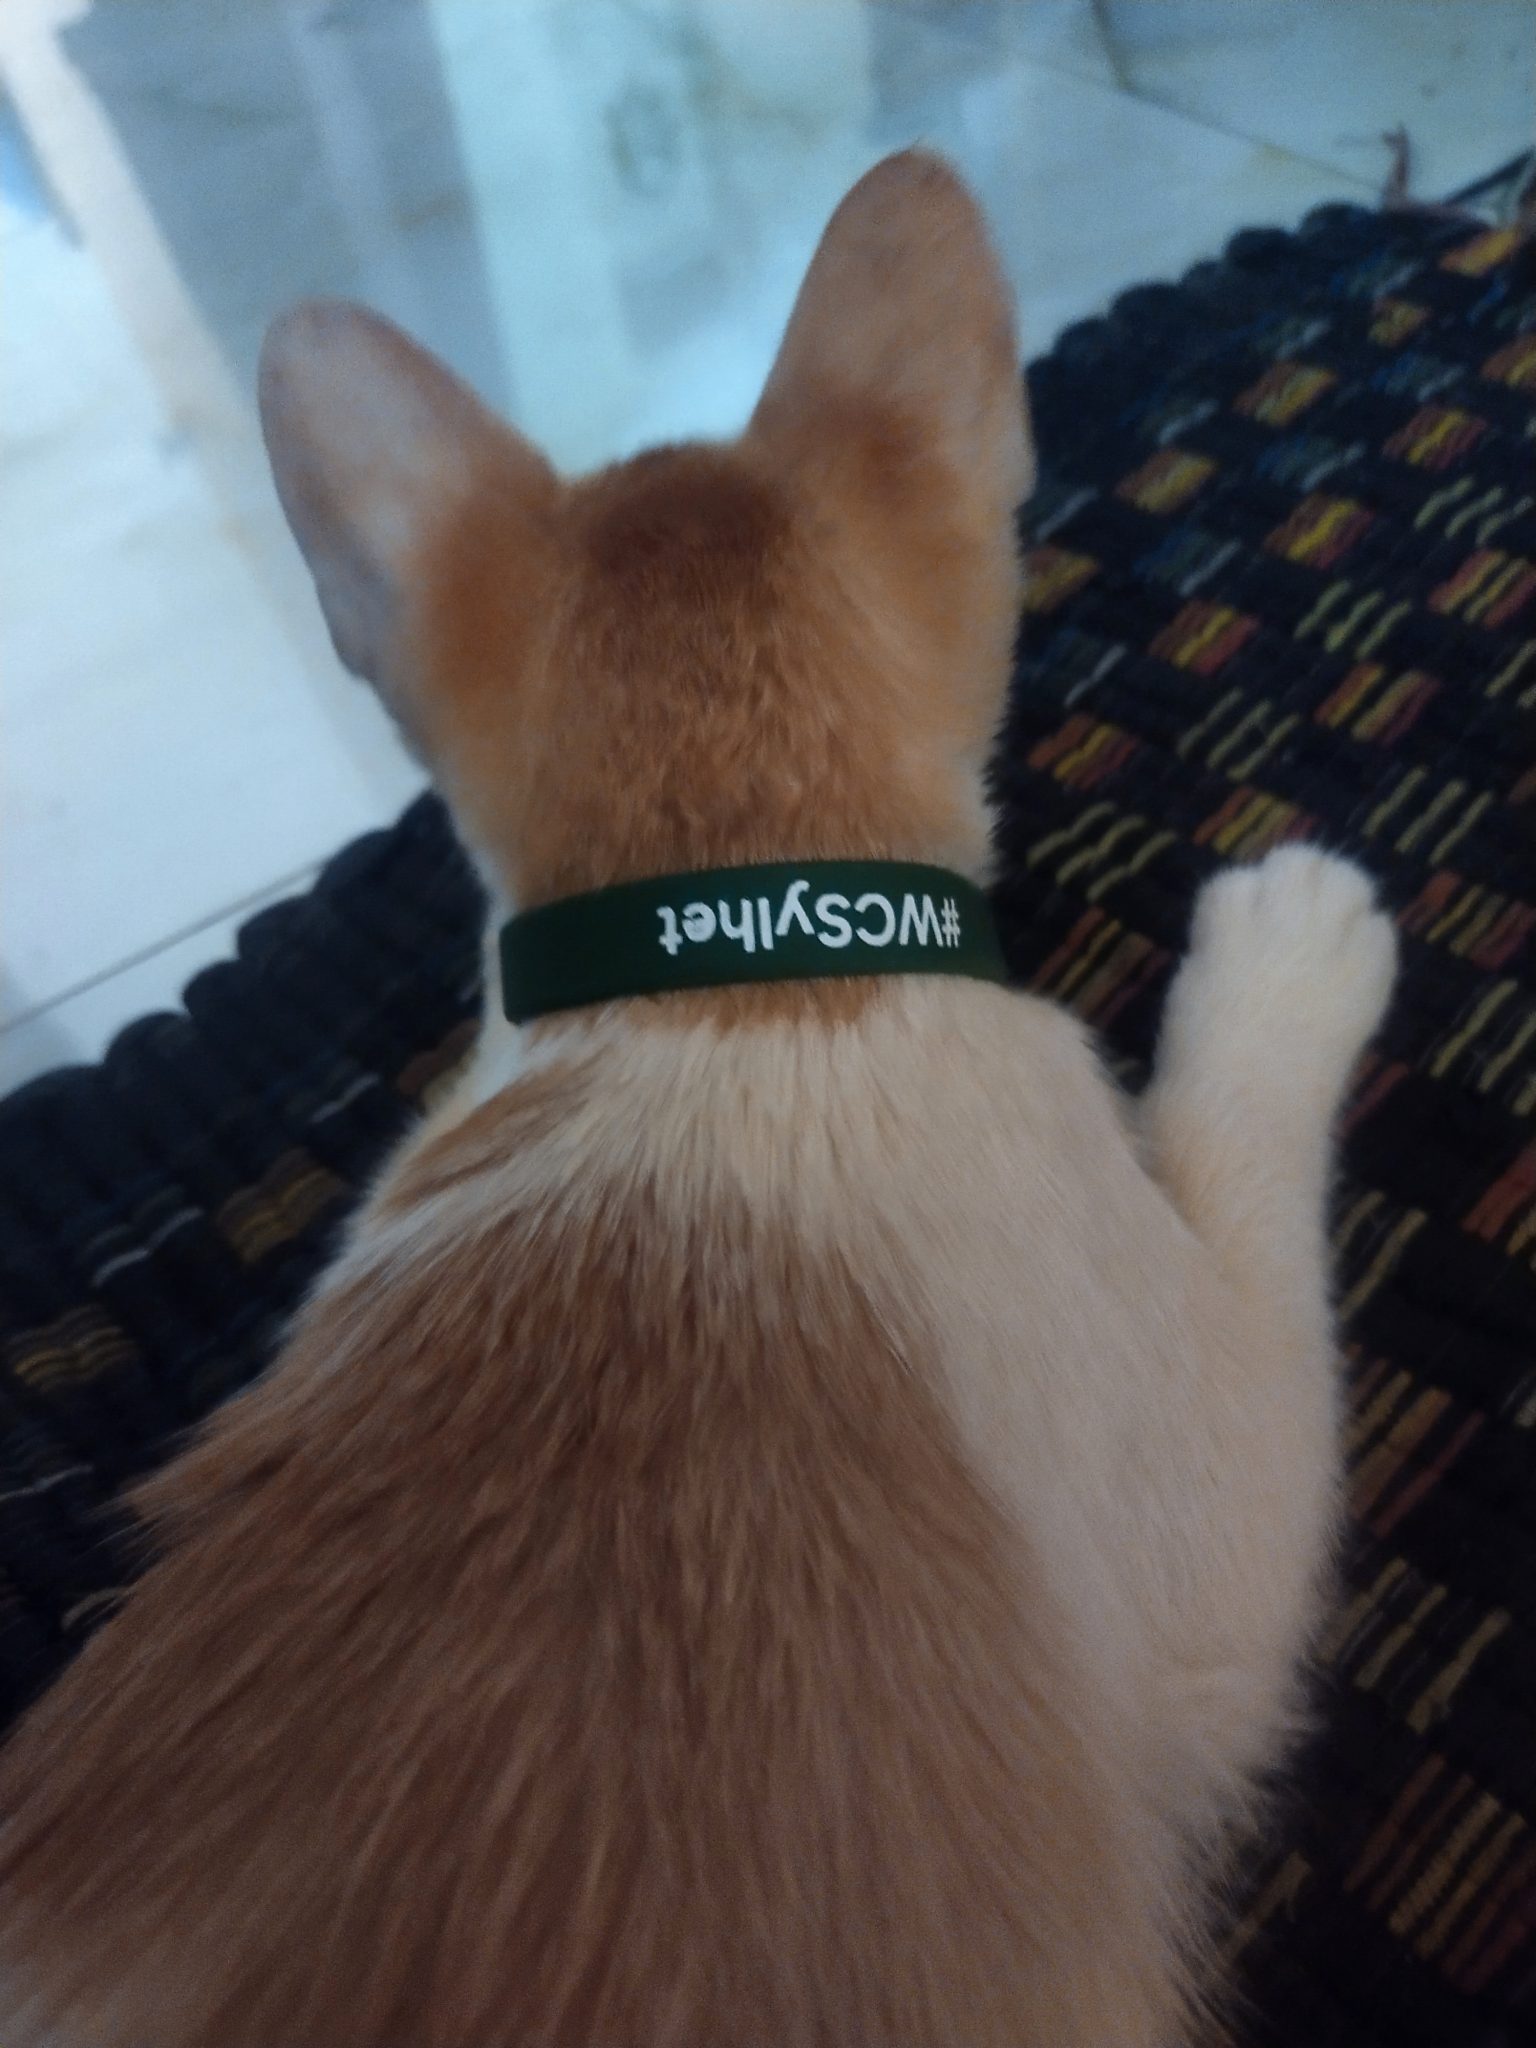 WordCamp Sylhet bracelet on a small cat as a collar. View is about 12 inches from the cat, looking down at the cat as it looks down over an edge.